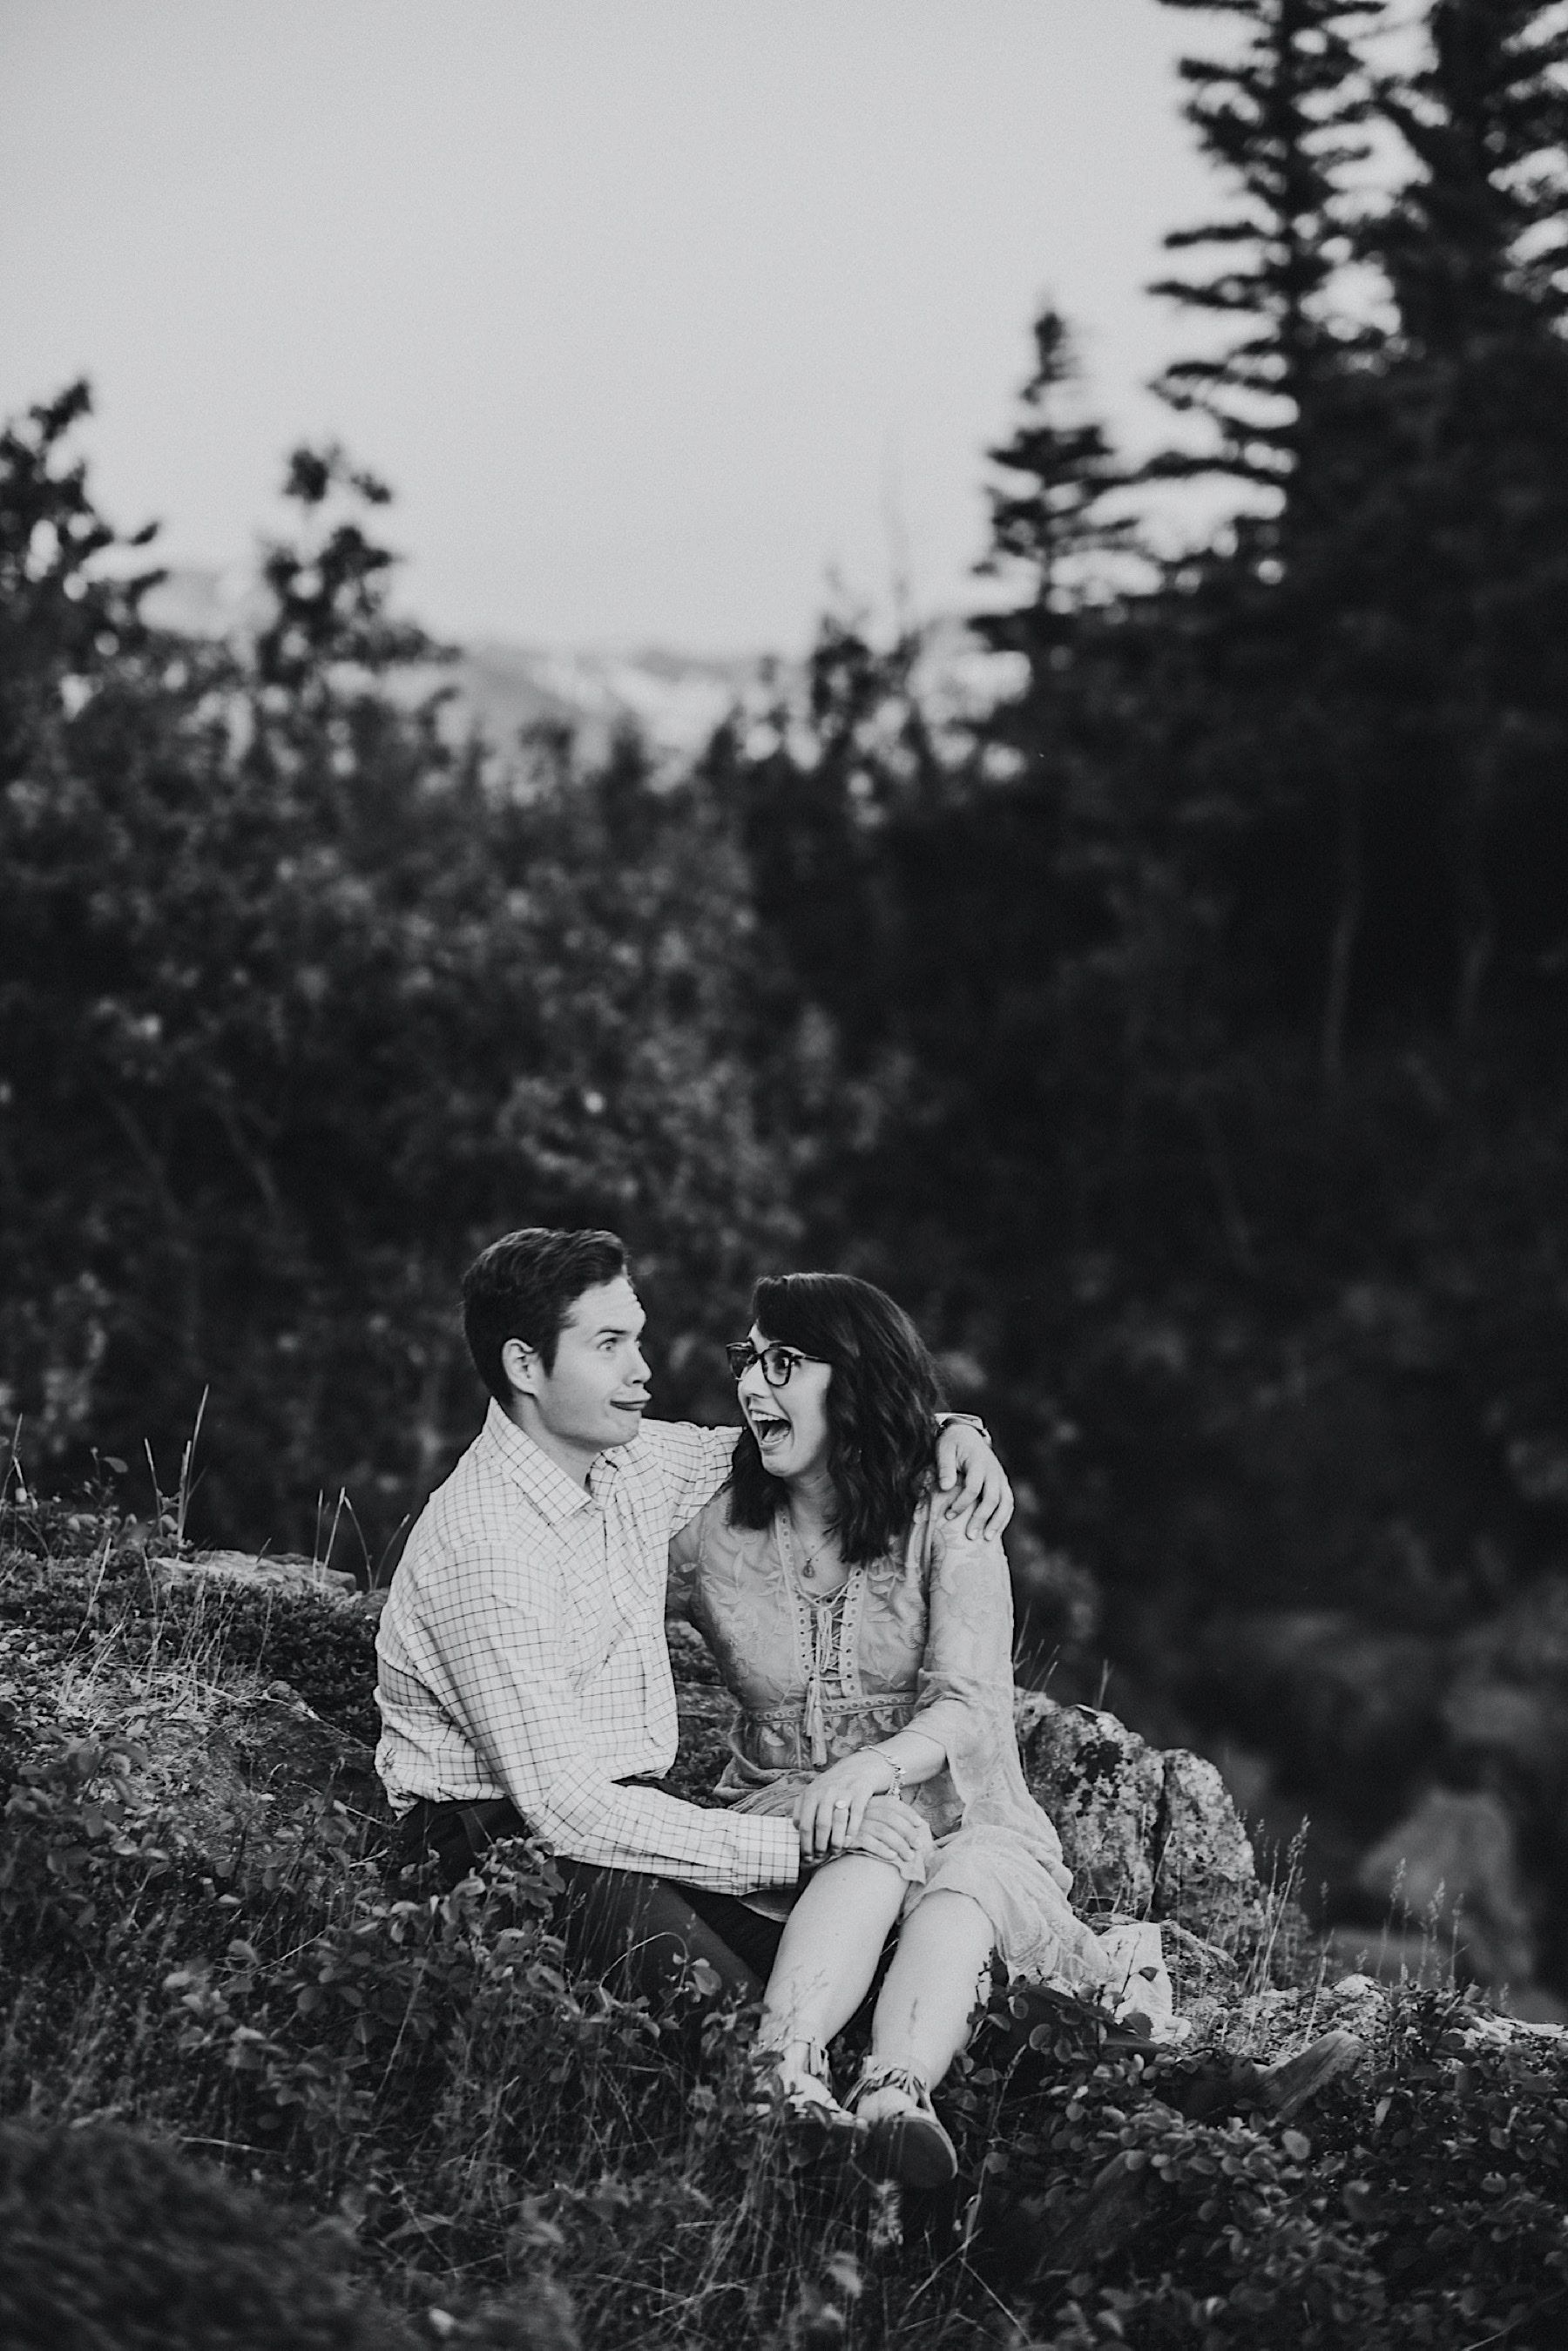 Black and white photo of couple making silly faces at each other